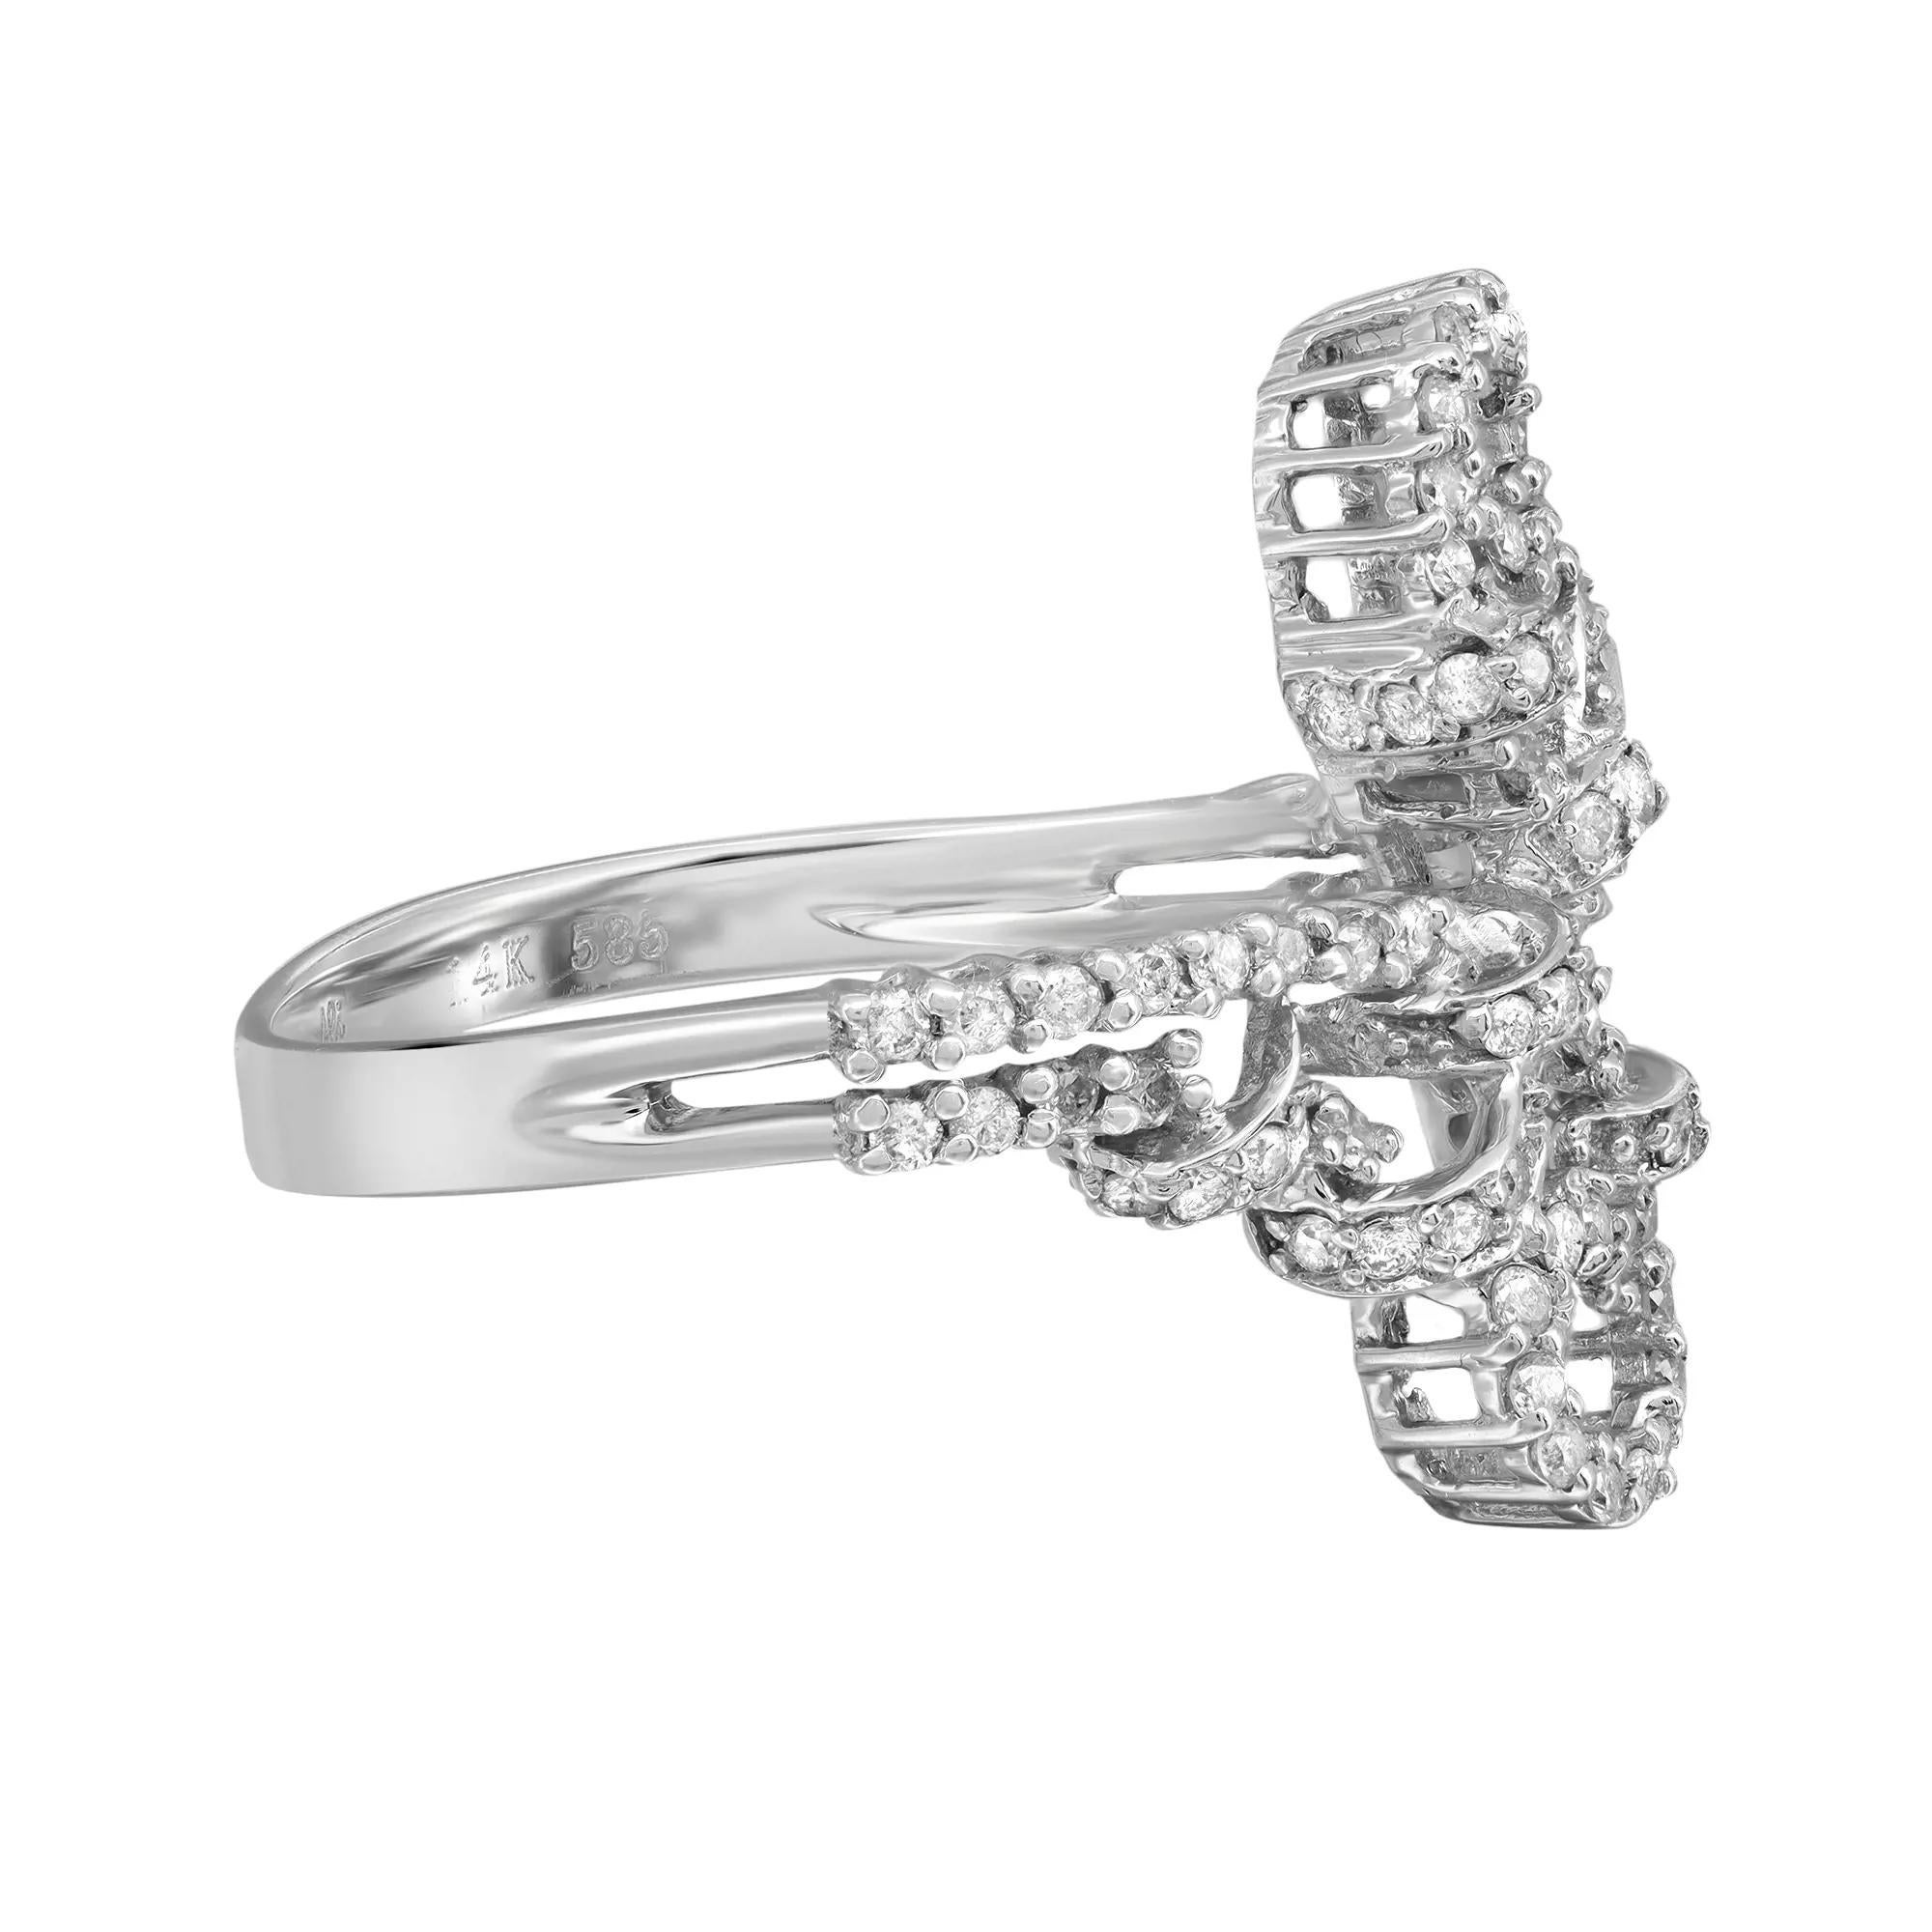 Speak of the bold and beautiful diamond ring design. This ring features prong set fine round brilliant cut diamonds crafted in high polished 14K white gold. Total diamond weight: 0.62 carat with the color I and SI-I clarity. Ring size: 7.5. Total